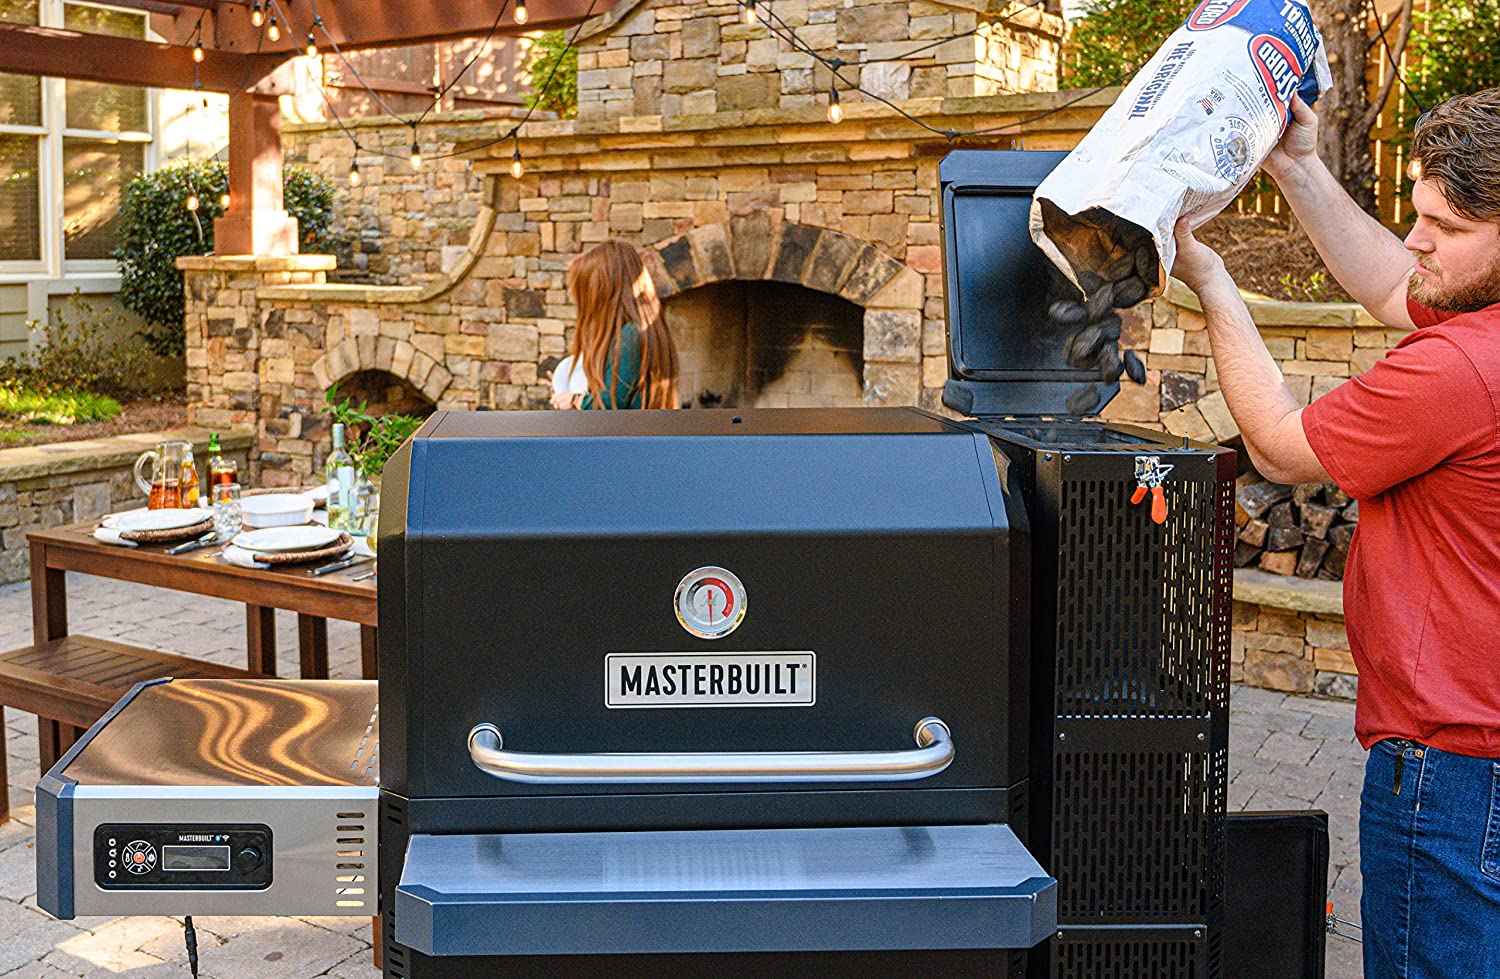 image of the Masterbuilt Gravity Series 1050 Digital Charcoal Grill & Smoker MB20041220 Charcoal hopper